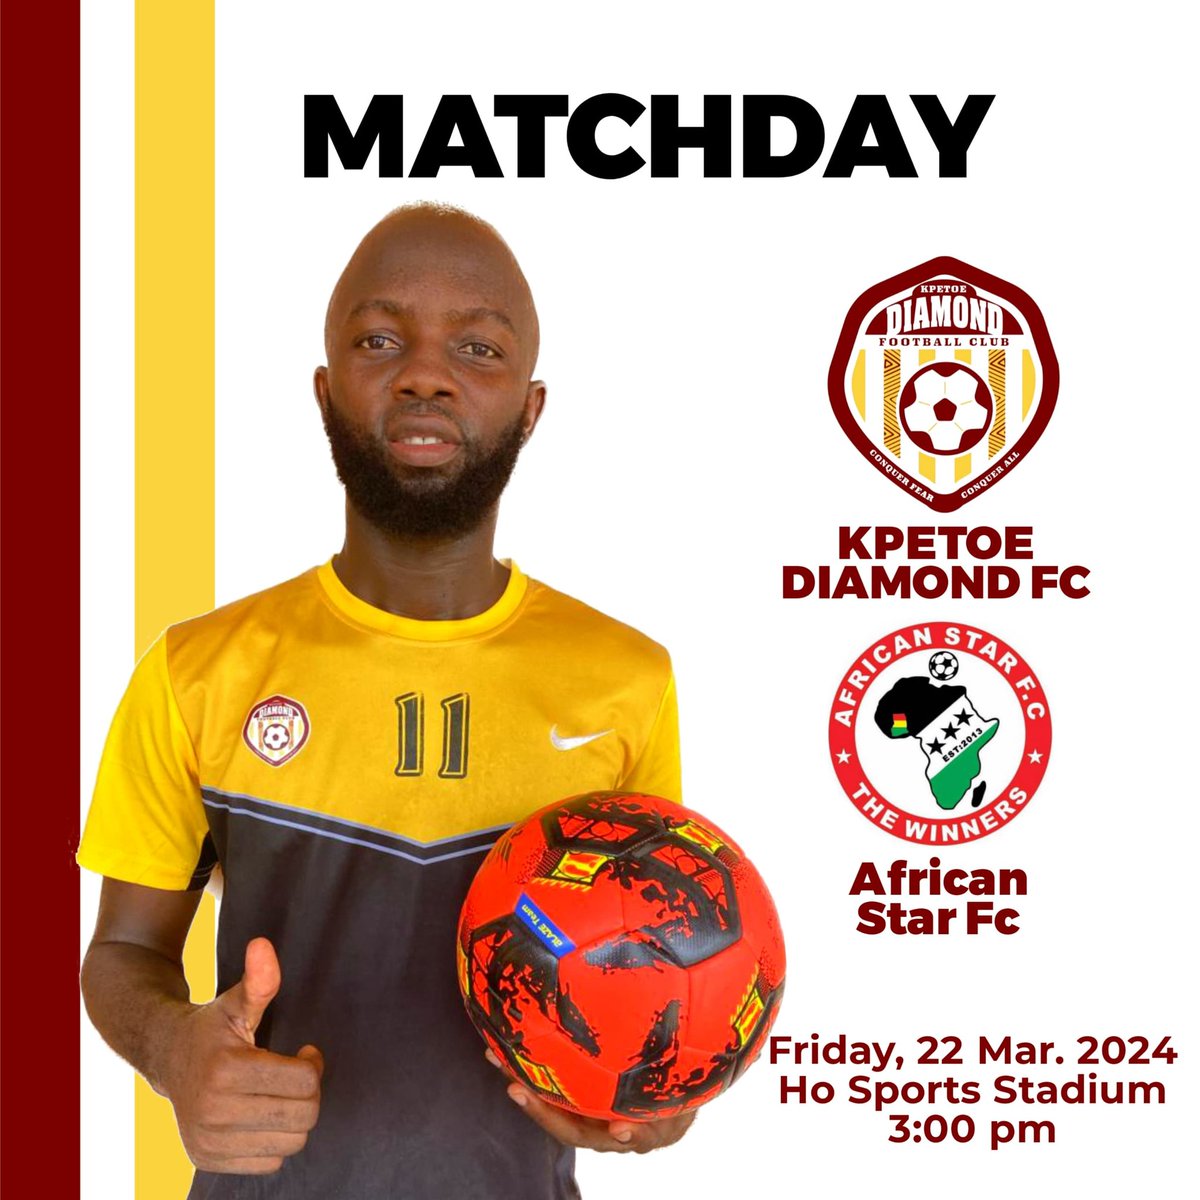 Another hurdle to cross tomorrow as we play African Star FC at 3pm. 

A win, win and win it is.

❤️💛🤍

#LetsWinTogether
#ConquerFearConquerAll
#haildiamondfc

@rfavolta